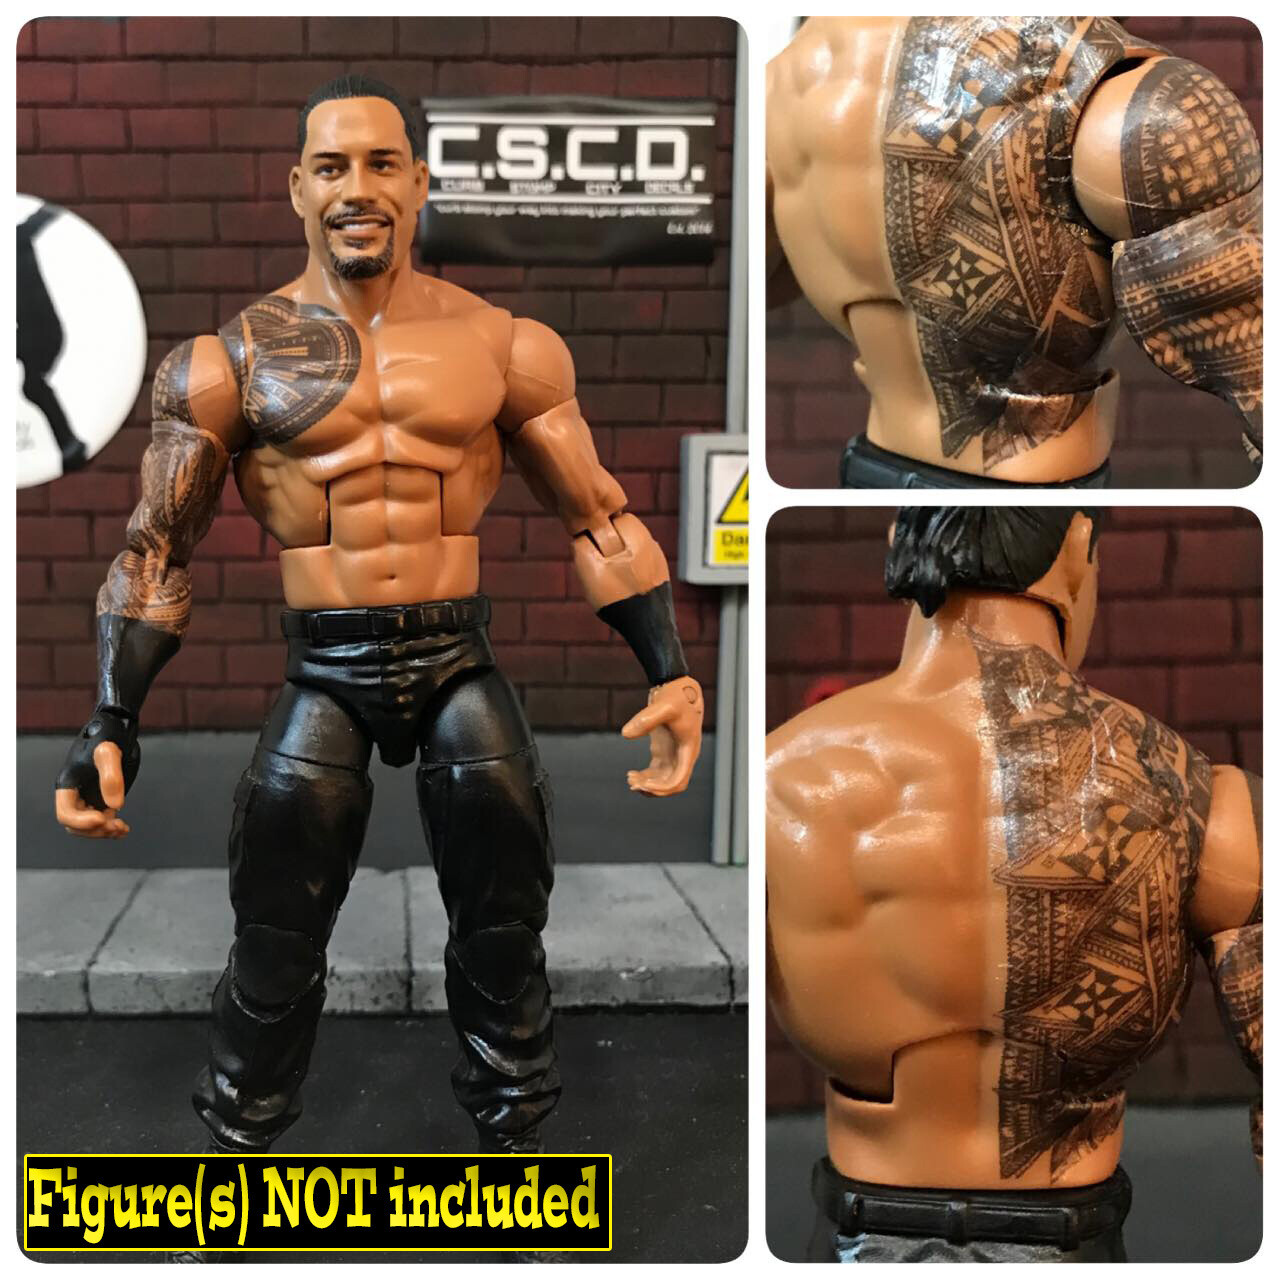 Roman Reigns tattoos How many tattoos does The Tribal Chief have